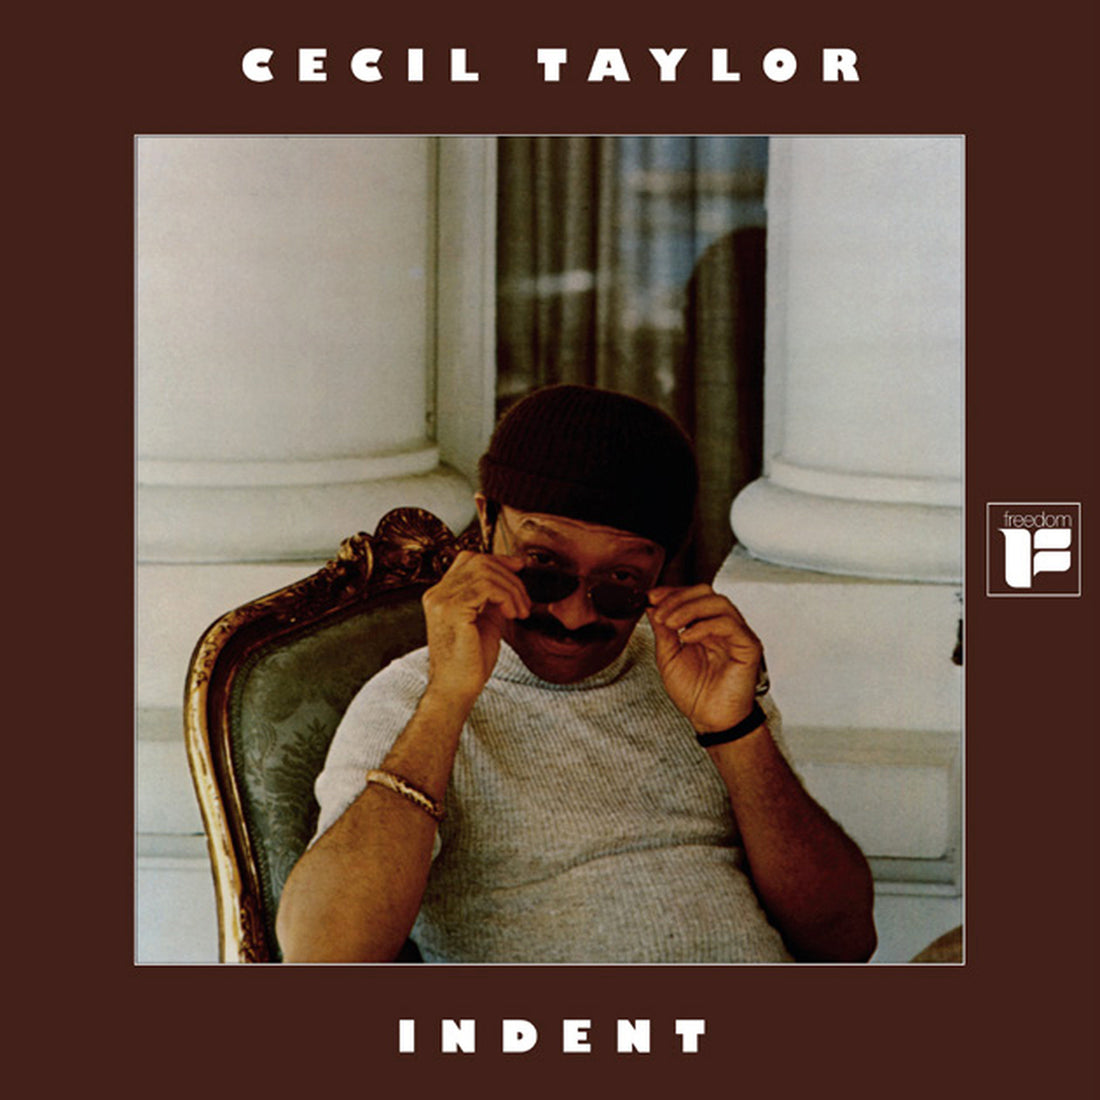 Cecil Taylor- Indent